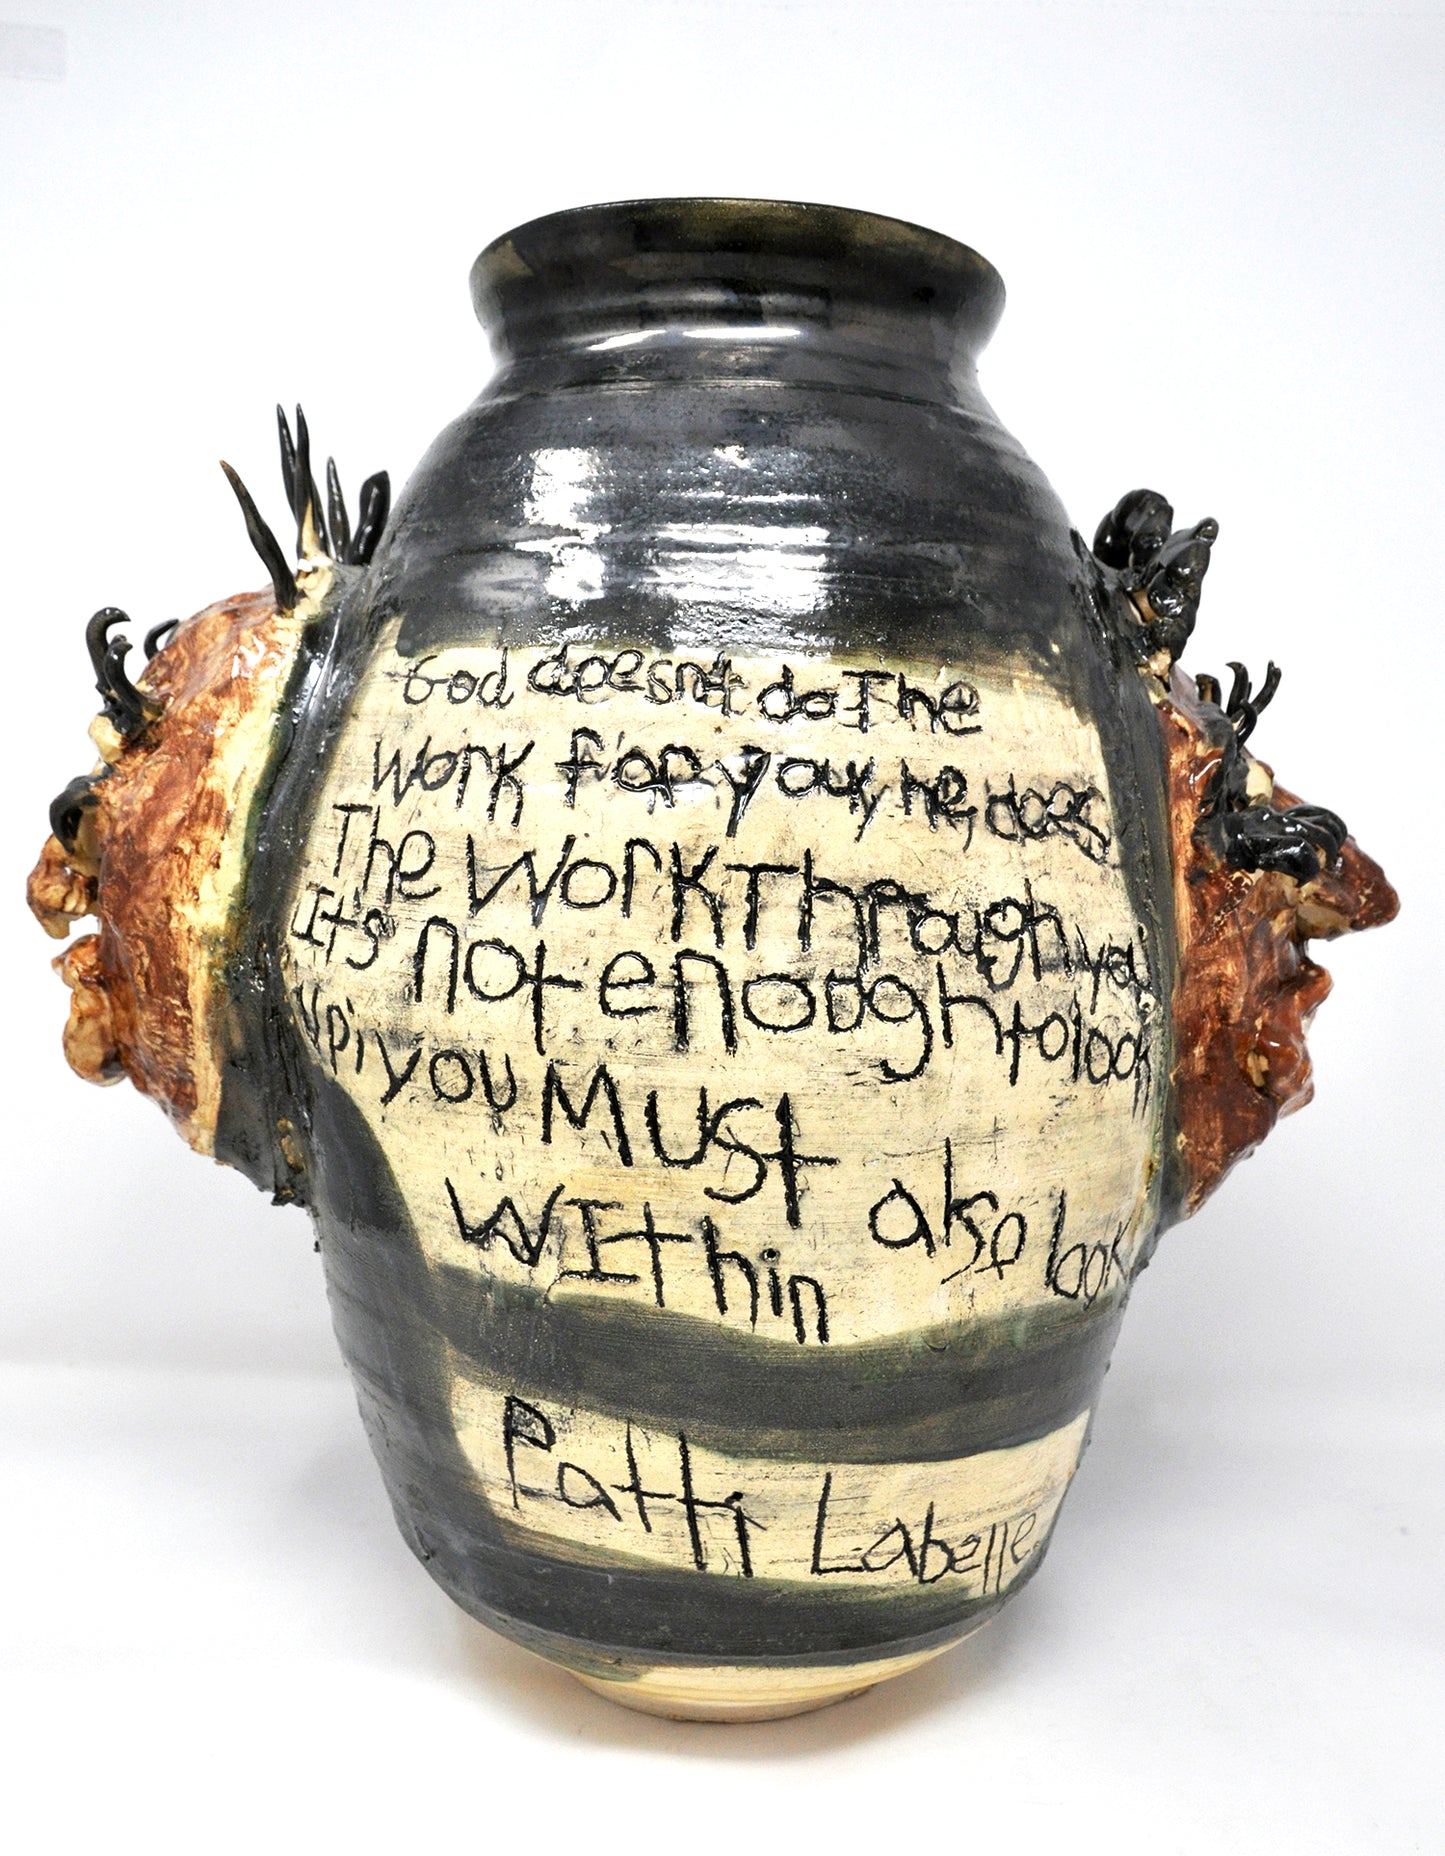 Back view of the Patti Labelle Vessel. Two faces are visible in profile on either side of the vessel. A hand-incised inscription reads centered on the piece reads: “God doesn’t do the work for you. He does the work through you. It’s not enough to look up, you must also look within. Patti Labelle.”